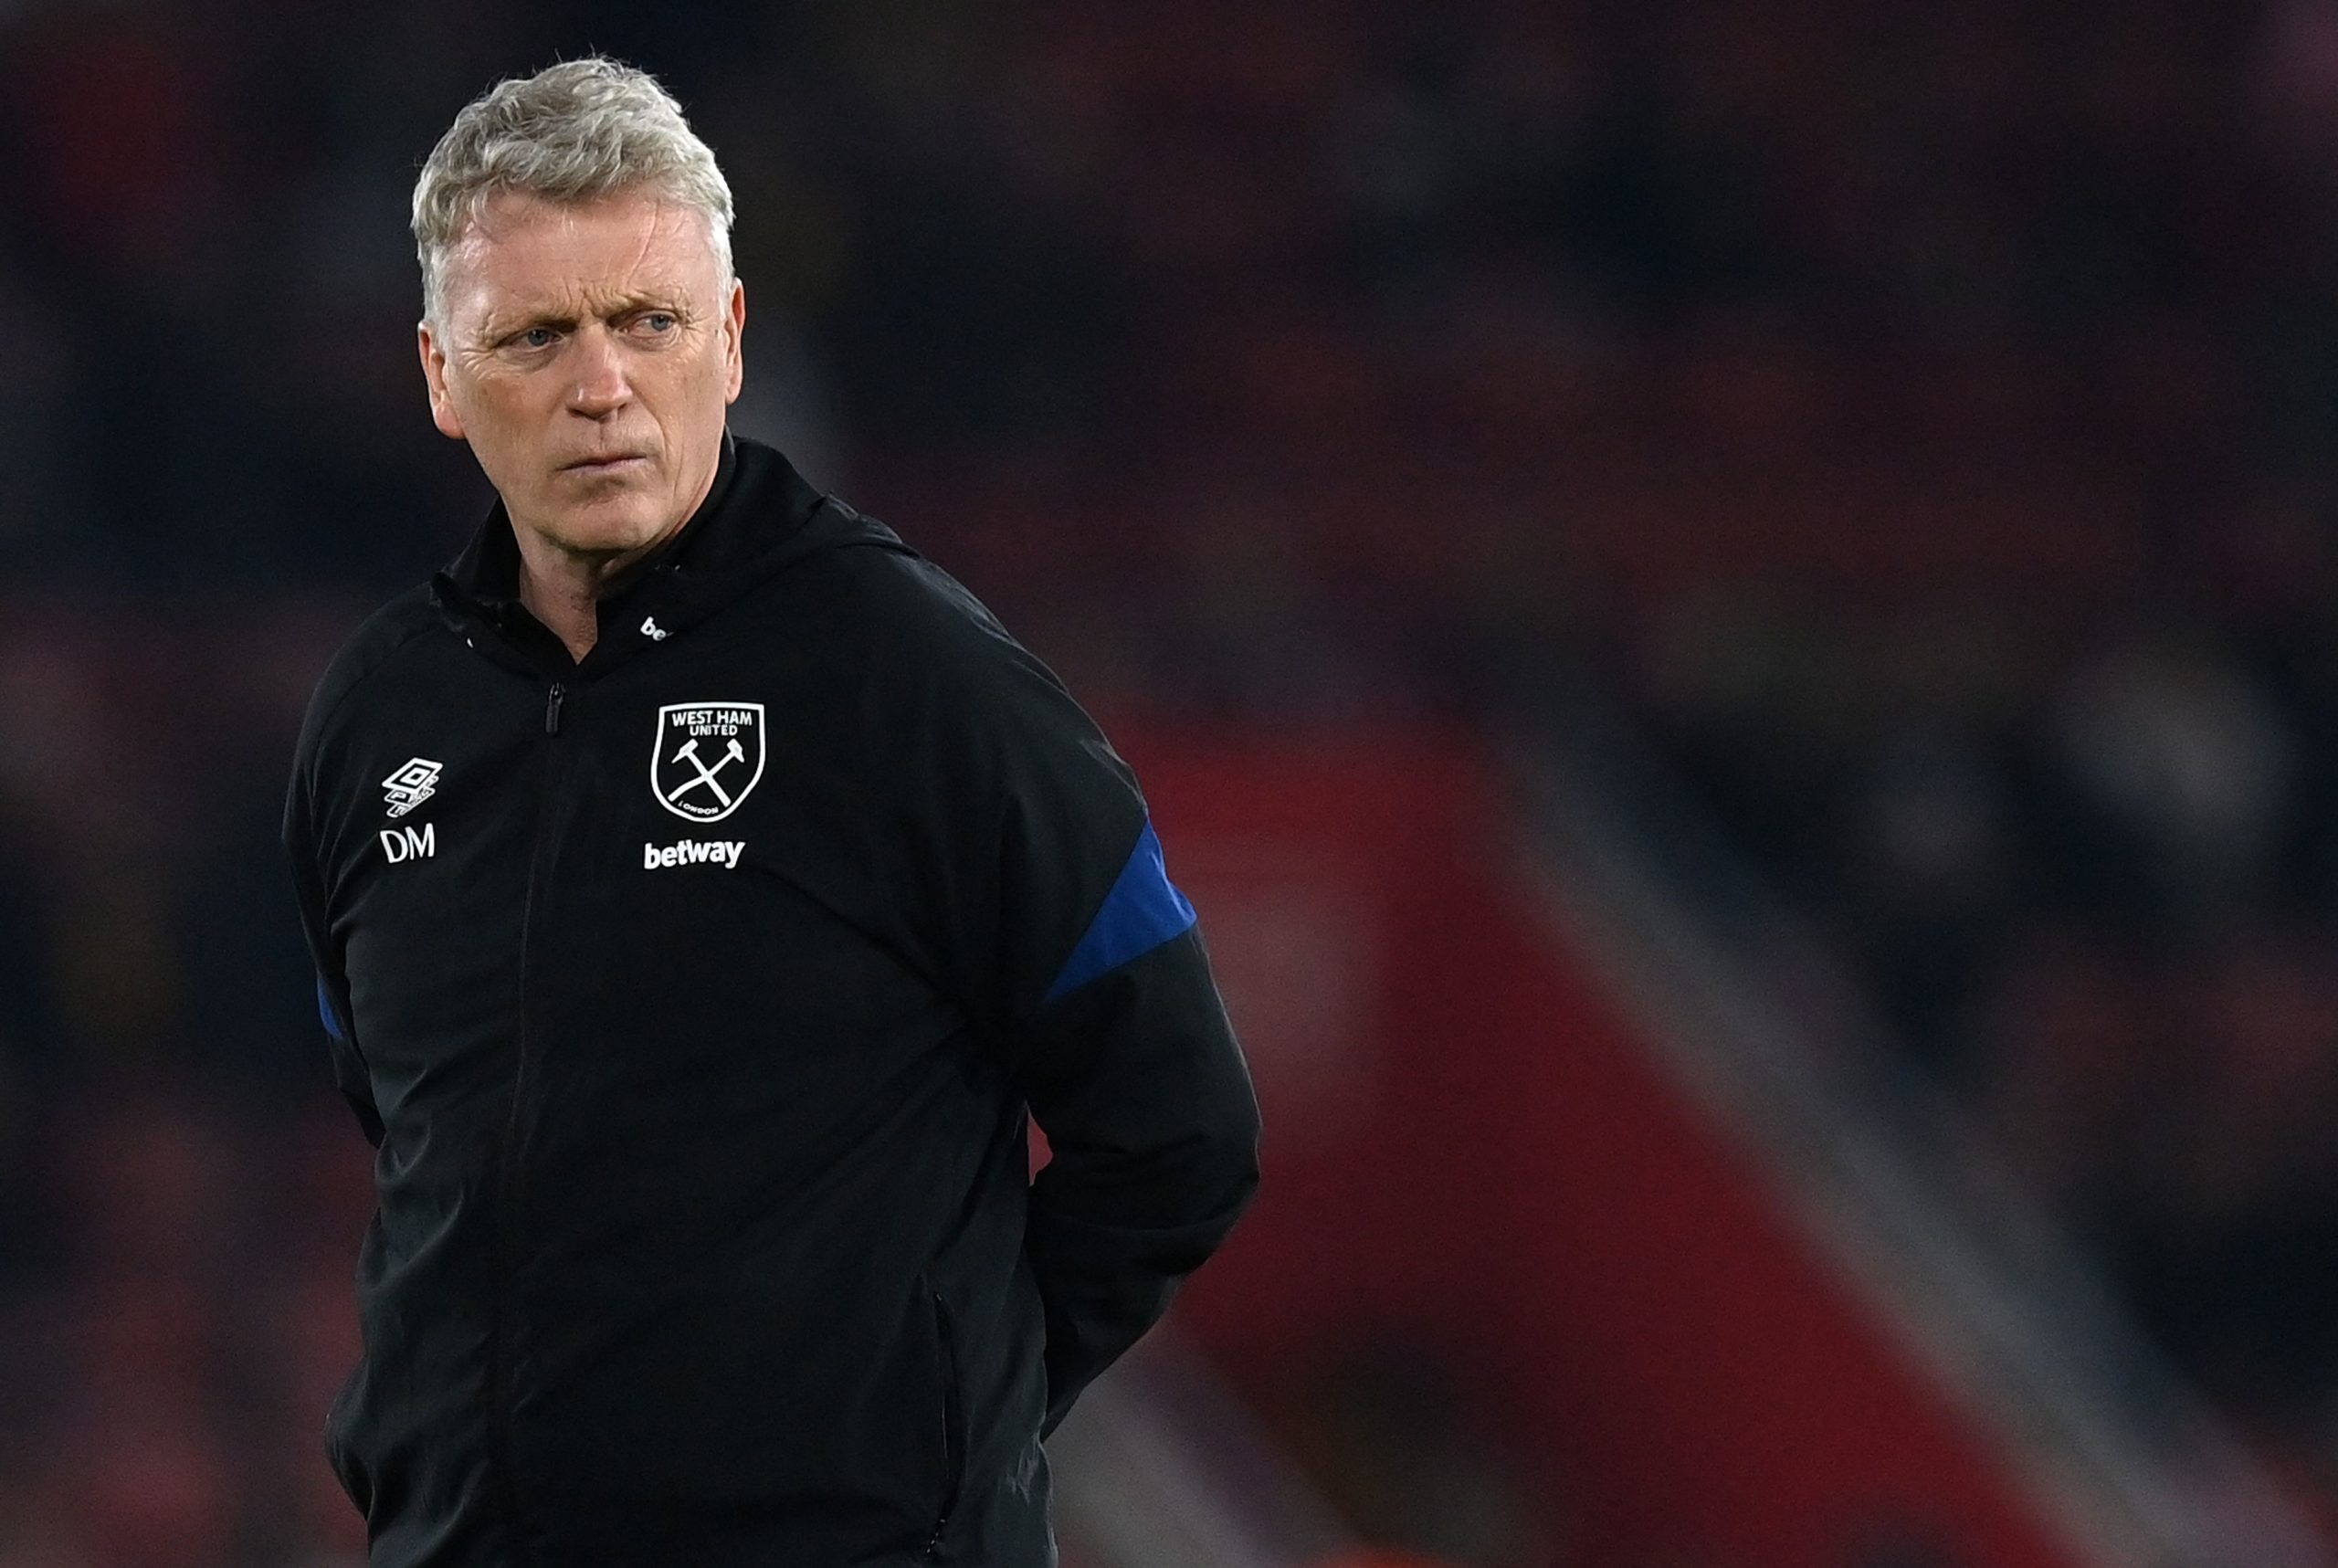 David Moyes made disastrous 76h minute decision that cost West Ham dearly vs Southampton